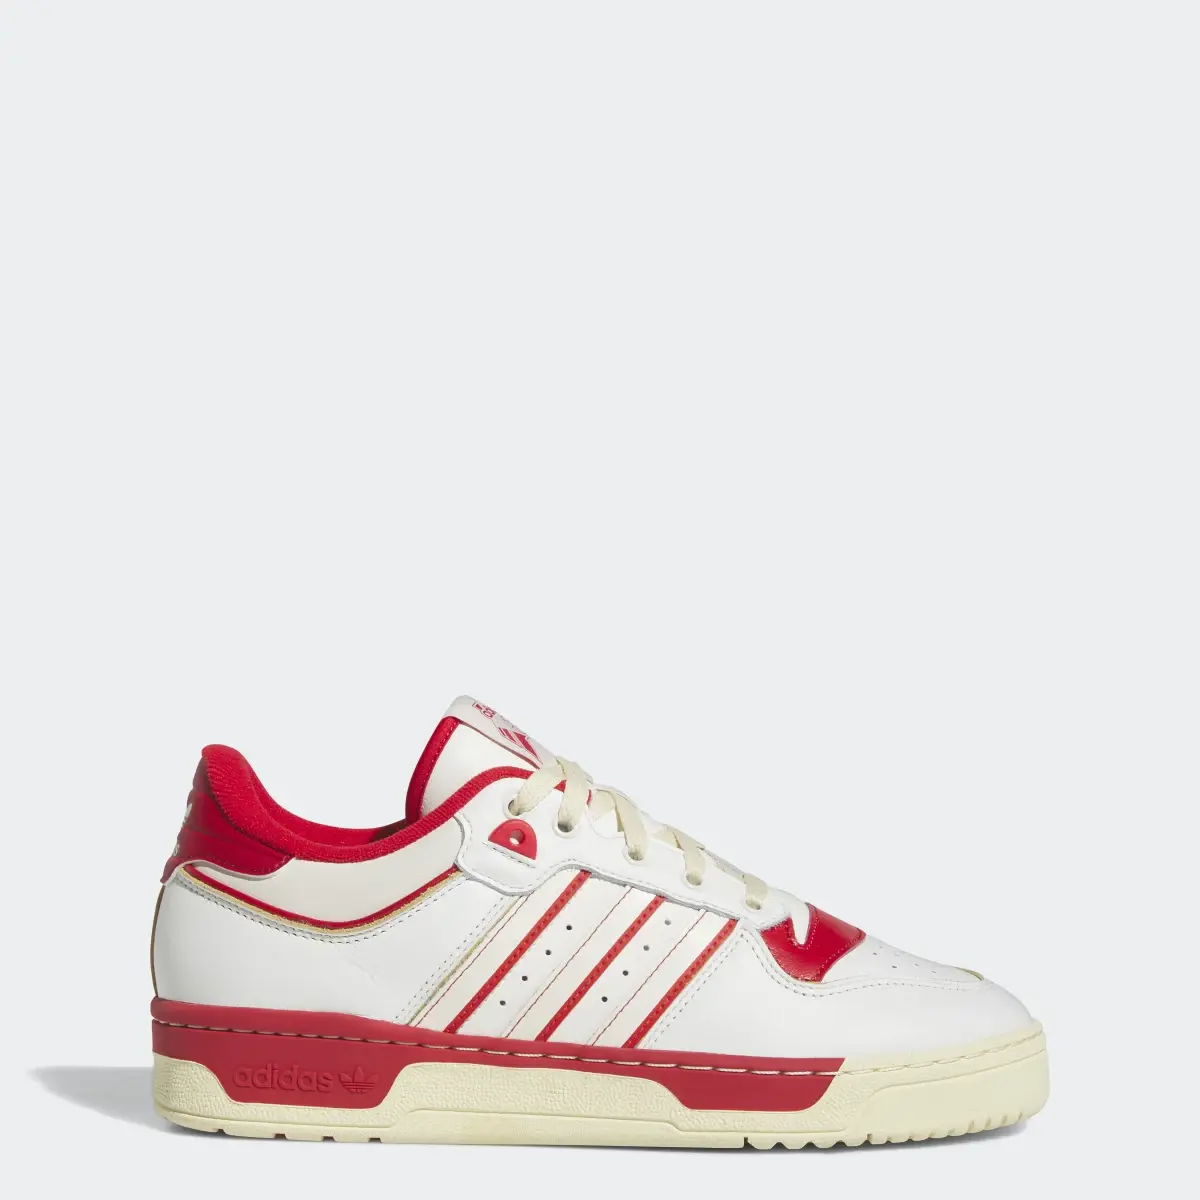 Adidas Rivalry Low 86 Shoes. 1